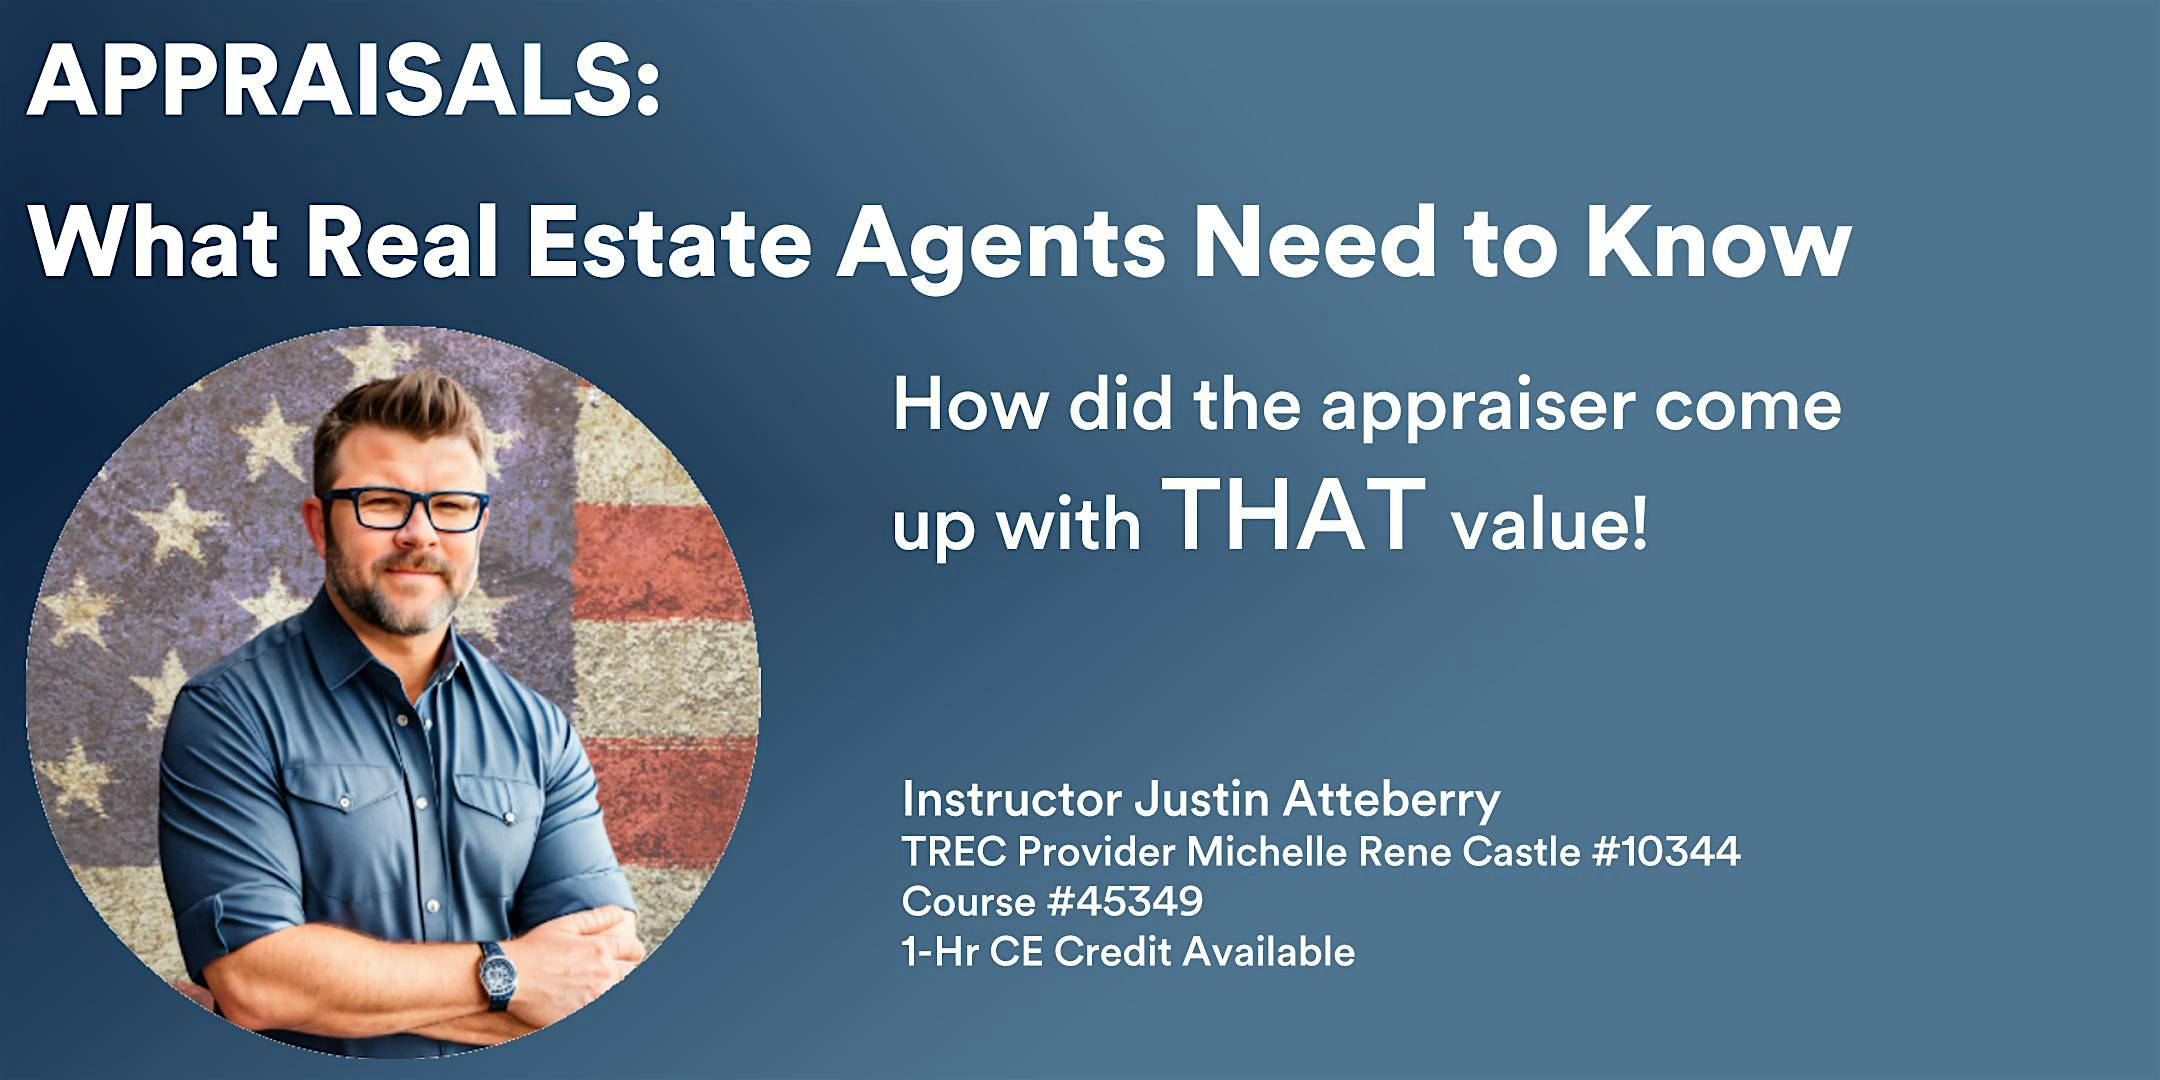 Appraisals: What Real Estate Agents Need to Know